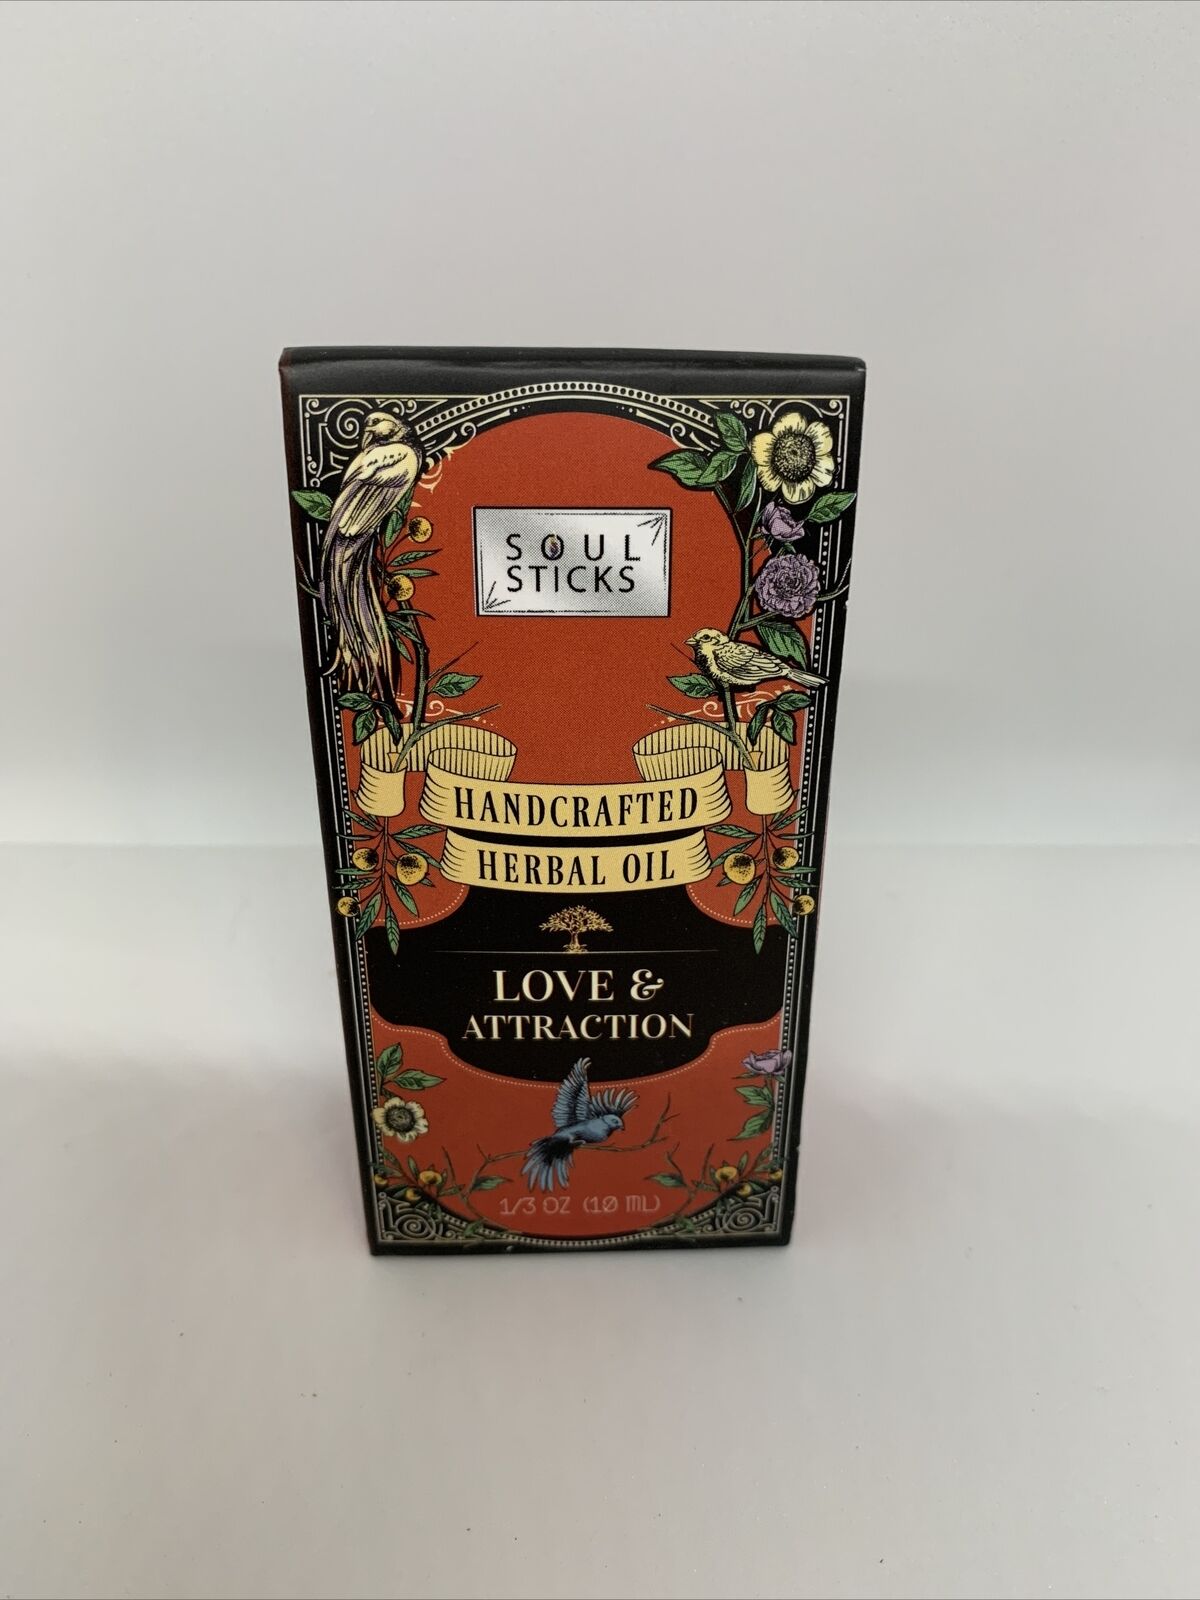 Soul Sticks Hand Crafted Herbal Oil ‘Love & Attraction’ For Rituals Use